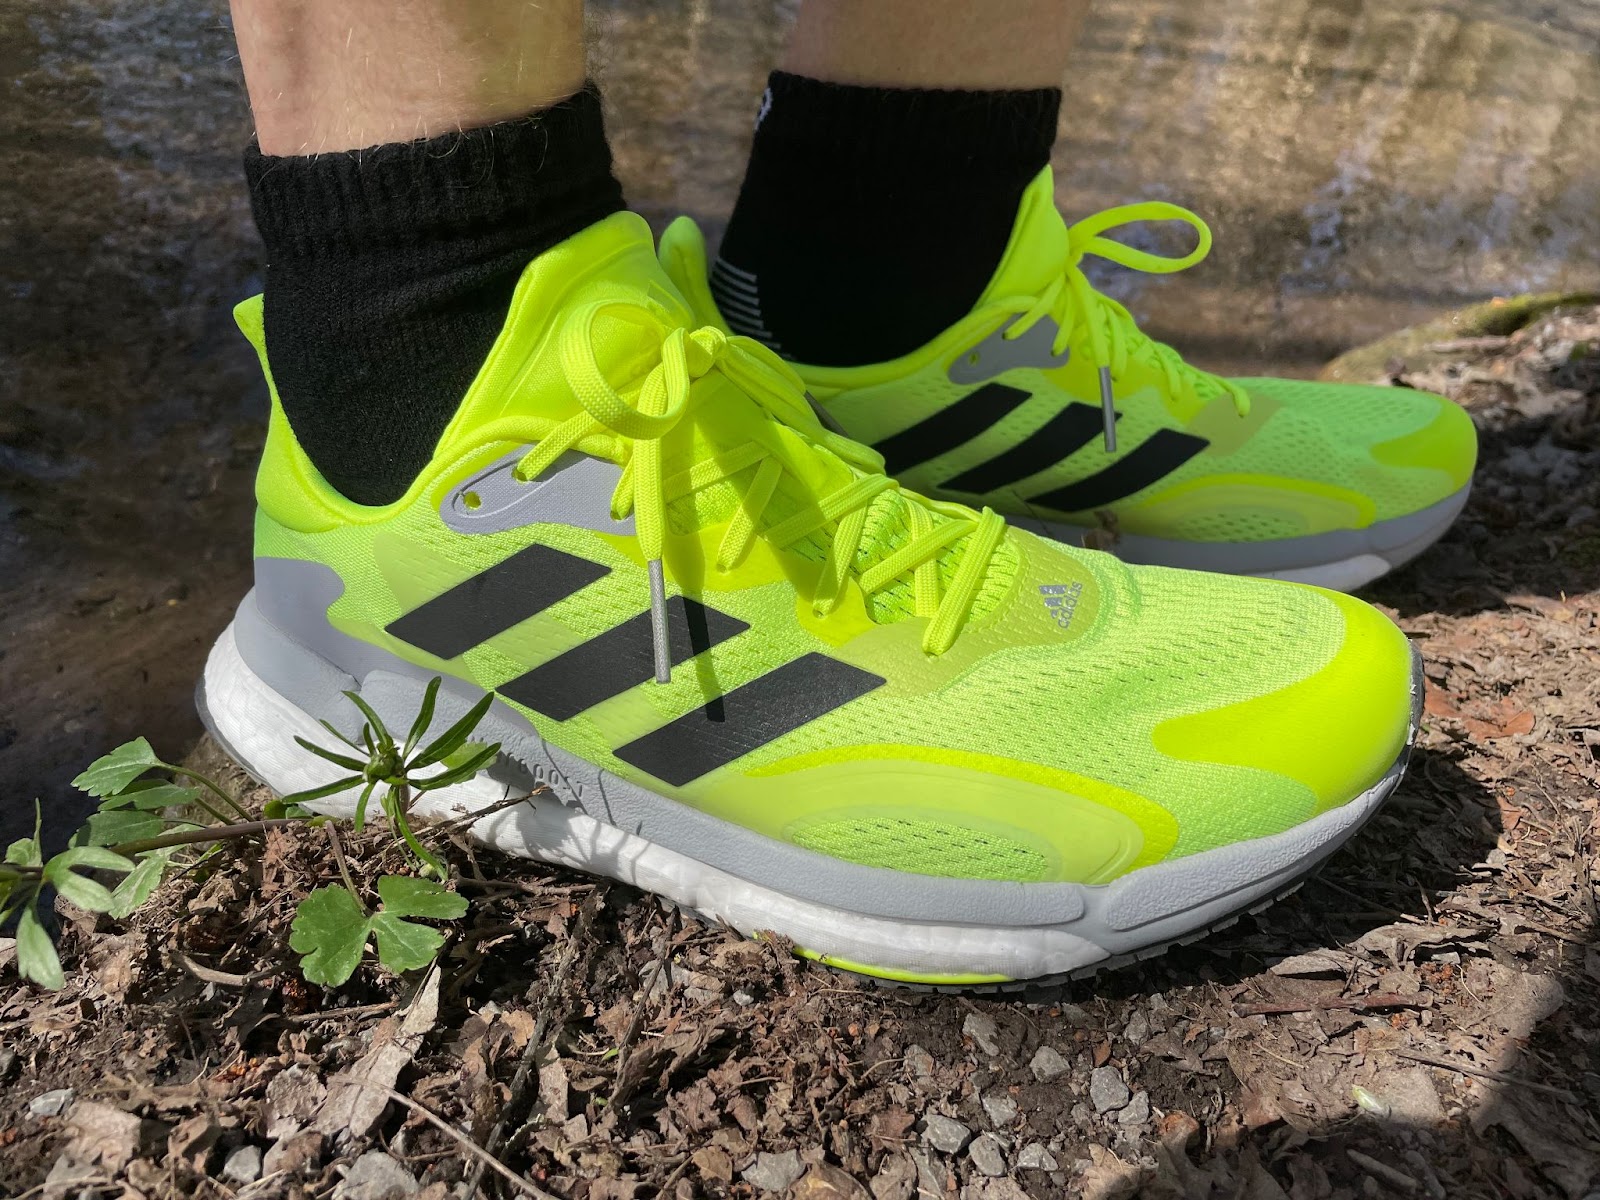 Tratado Fuera claro Road Trail Run: adidas Solarboost 3 Review: A stable performance!